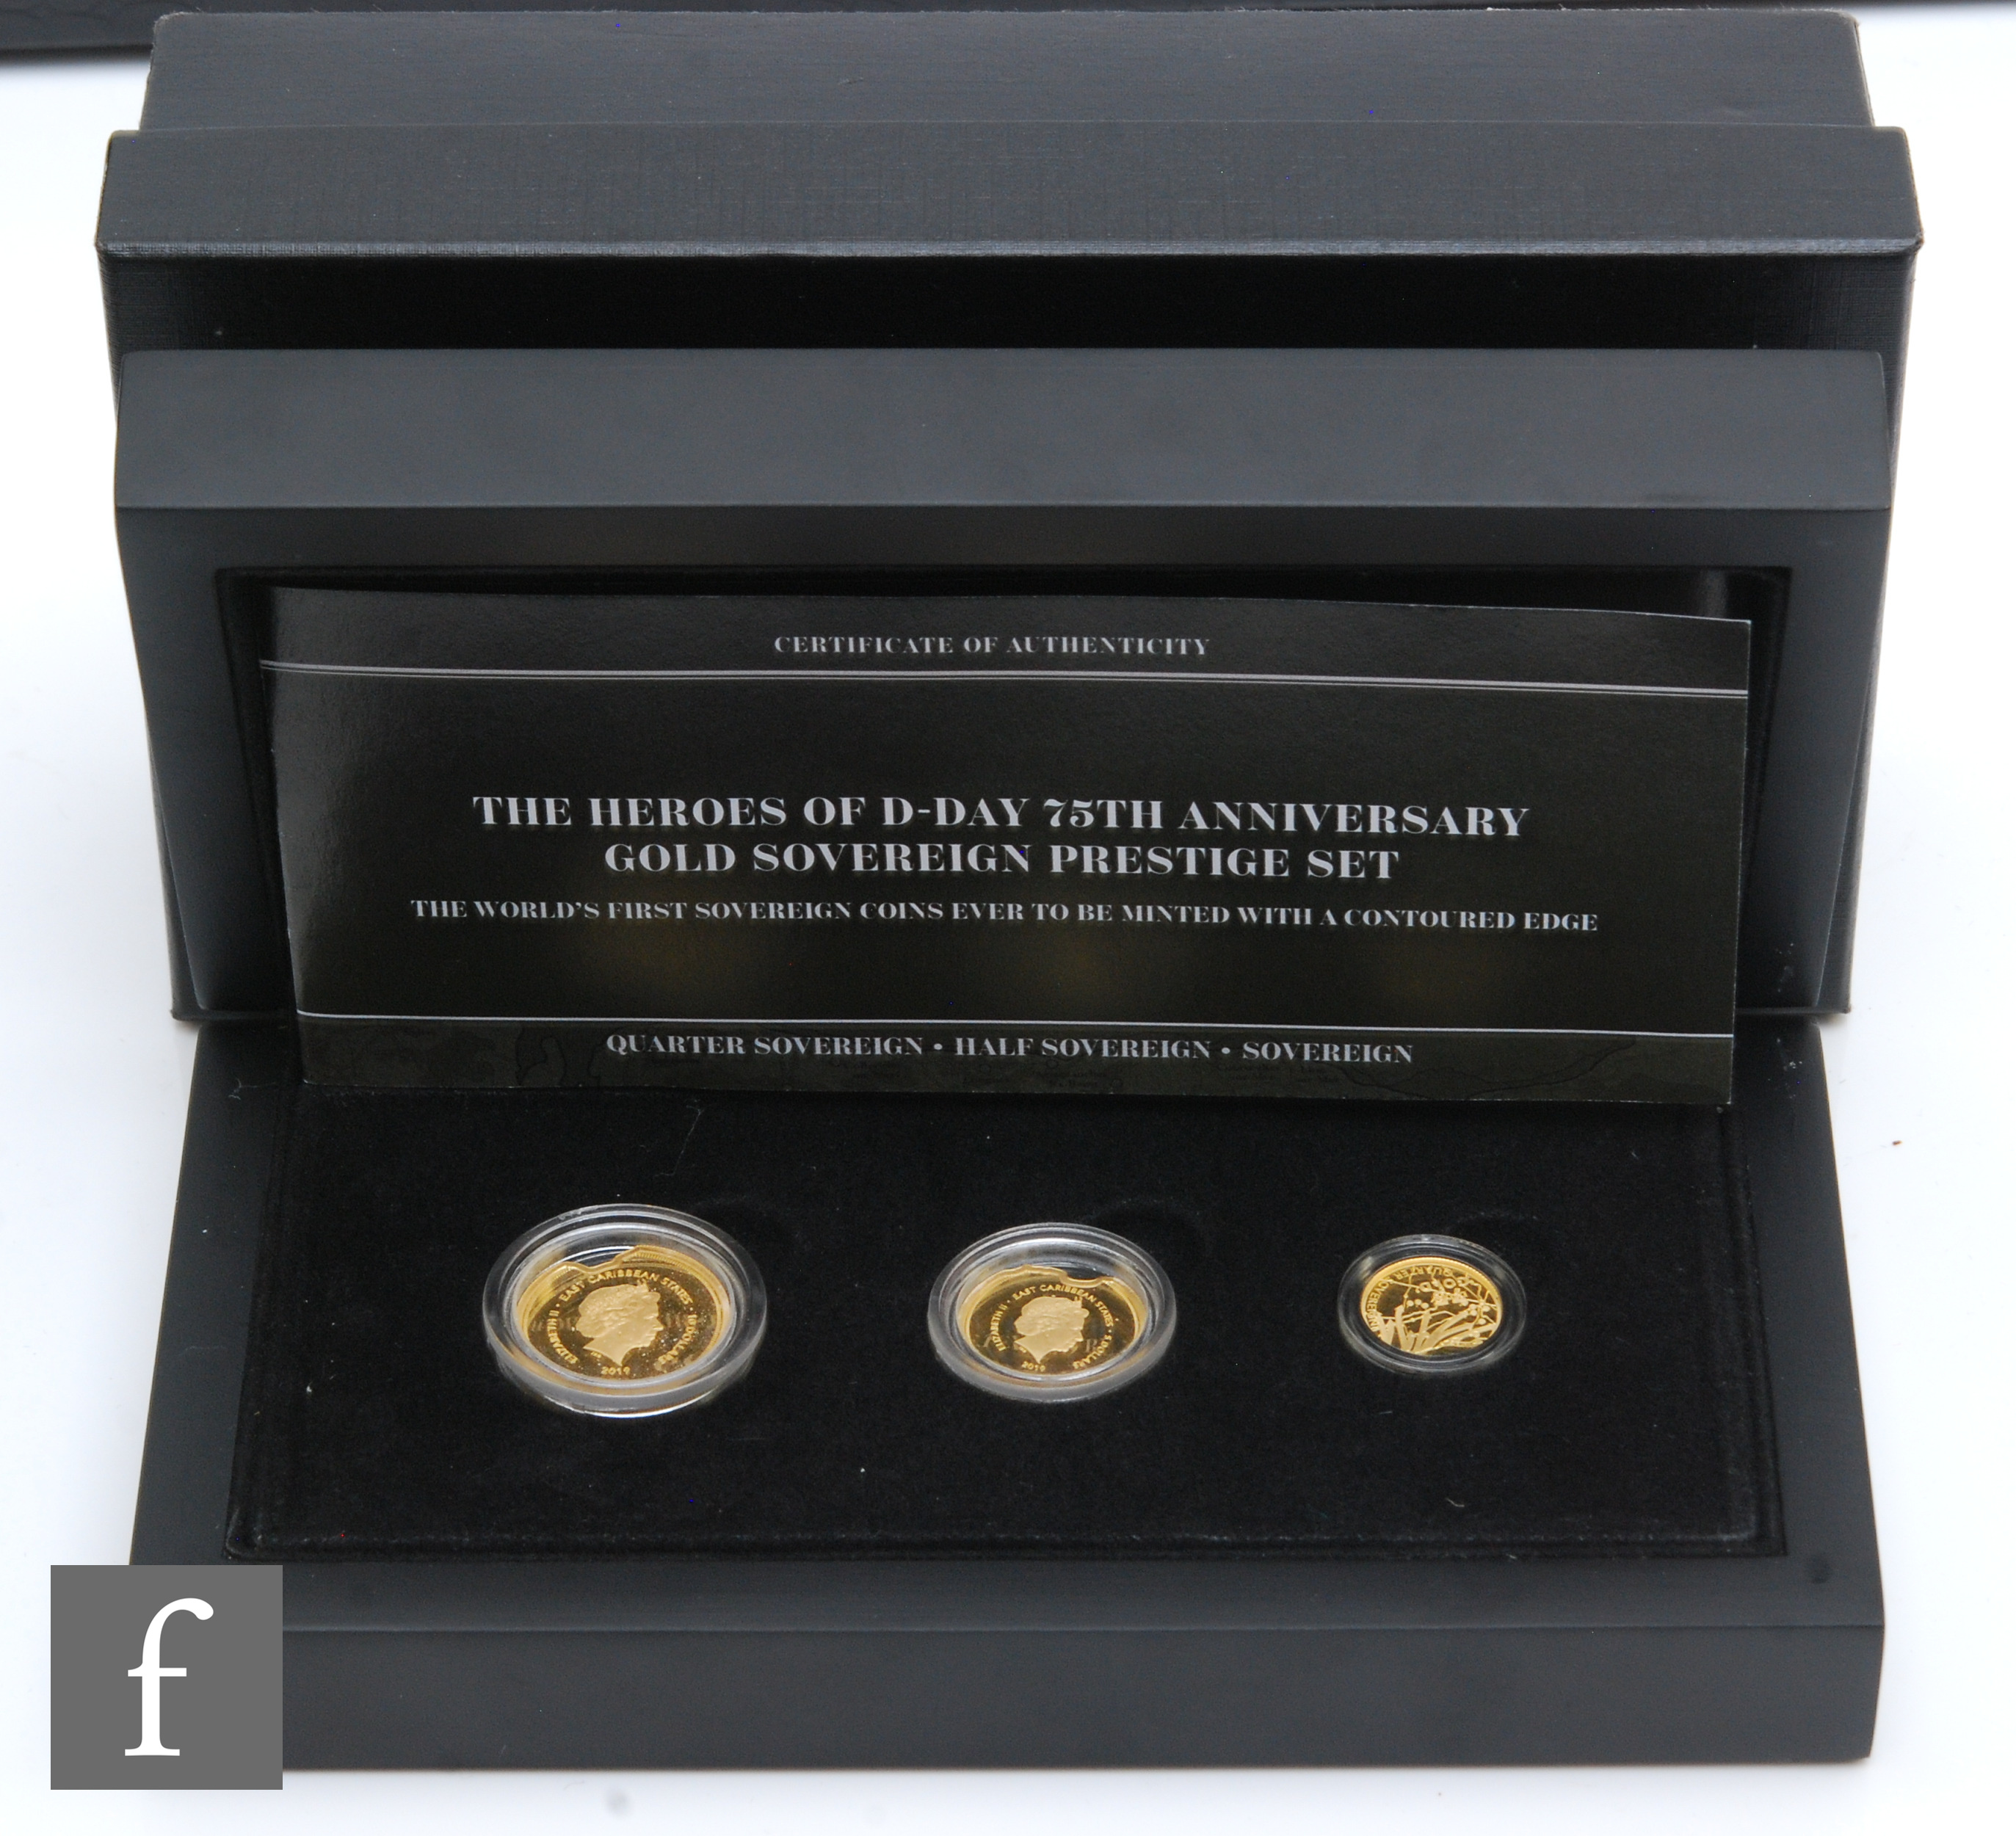 An Elizabeth II Heroes of D-Day 75th Anniversary gold sovereign set, dated 2019, certificate and